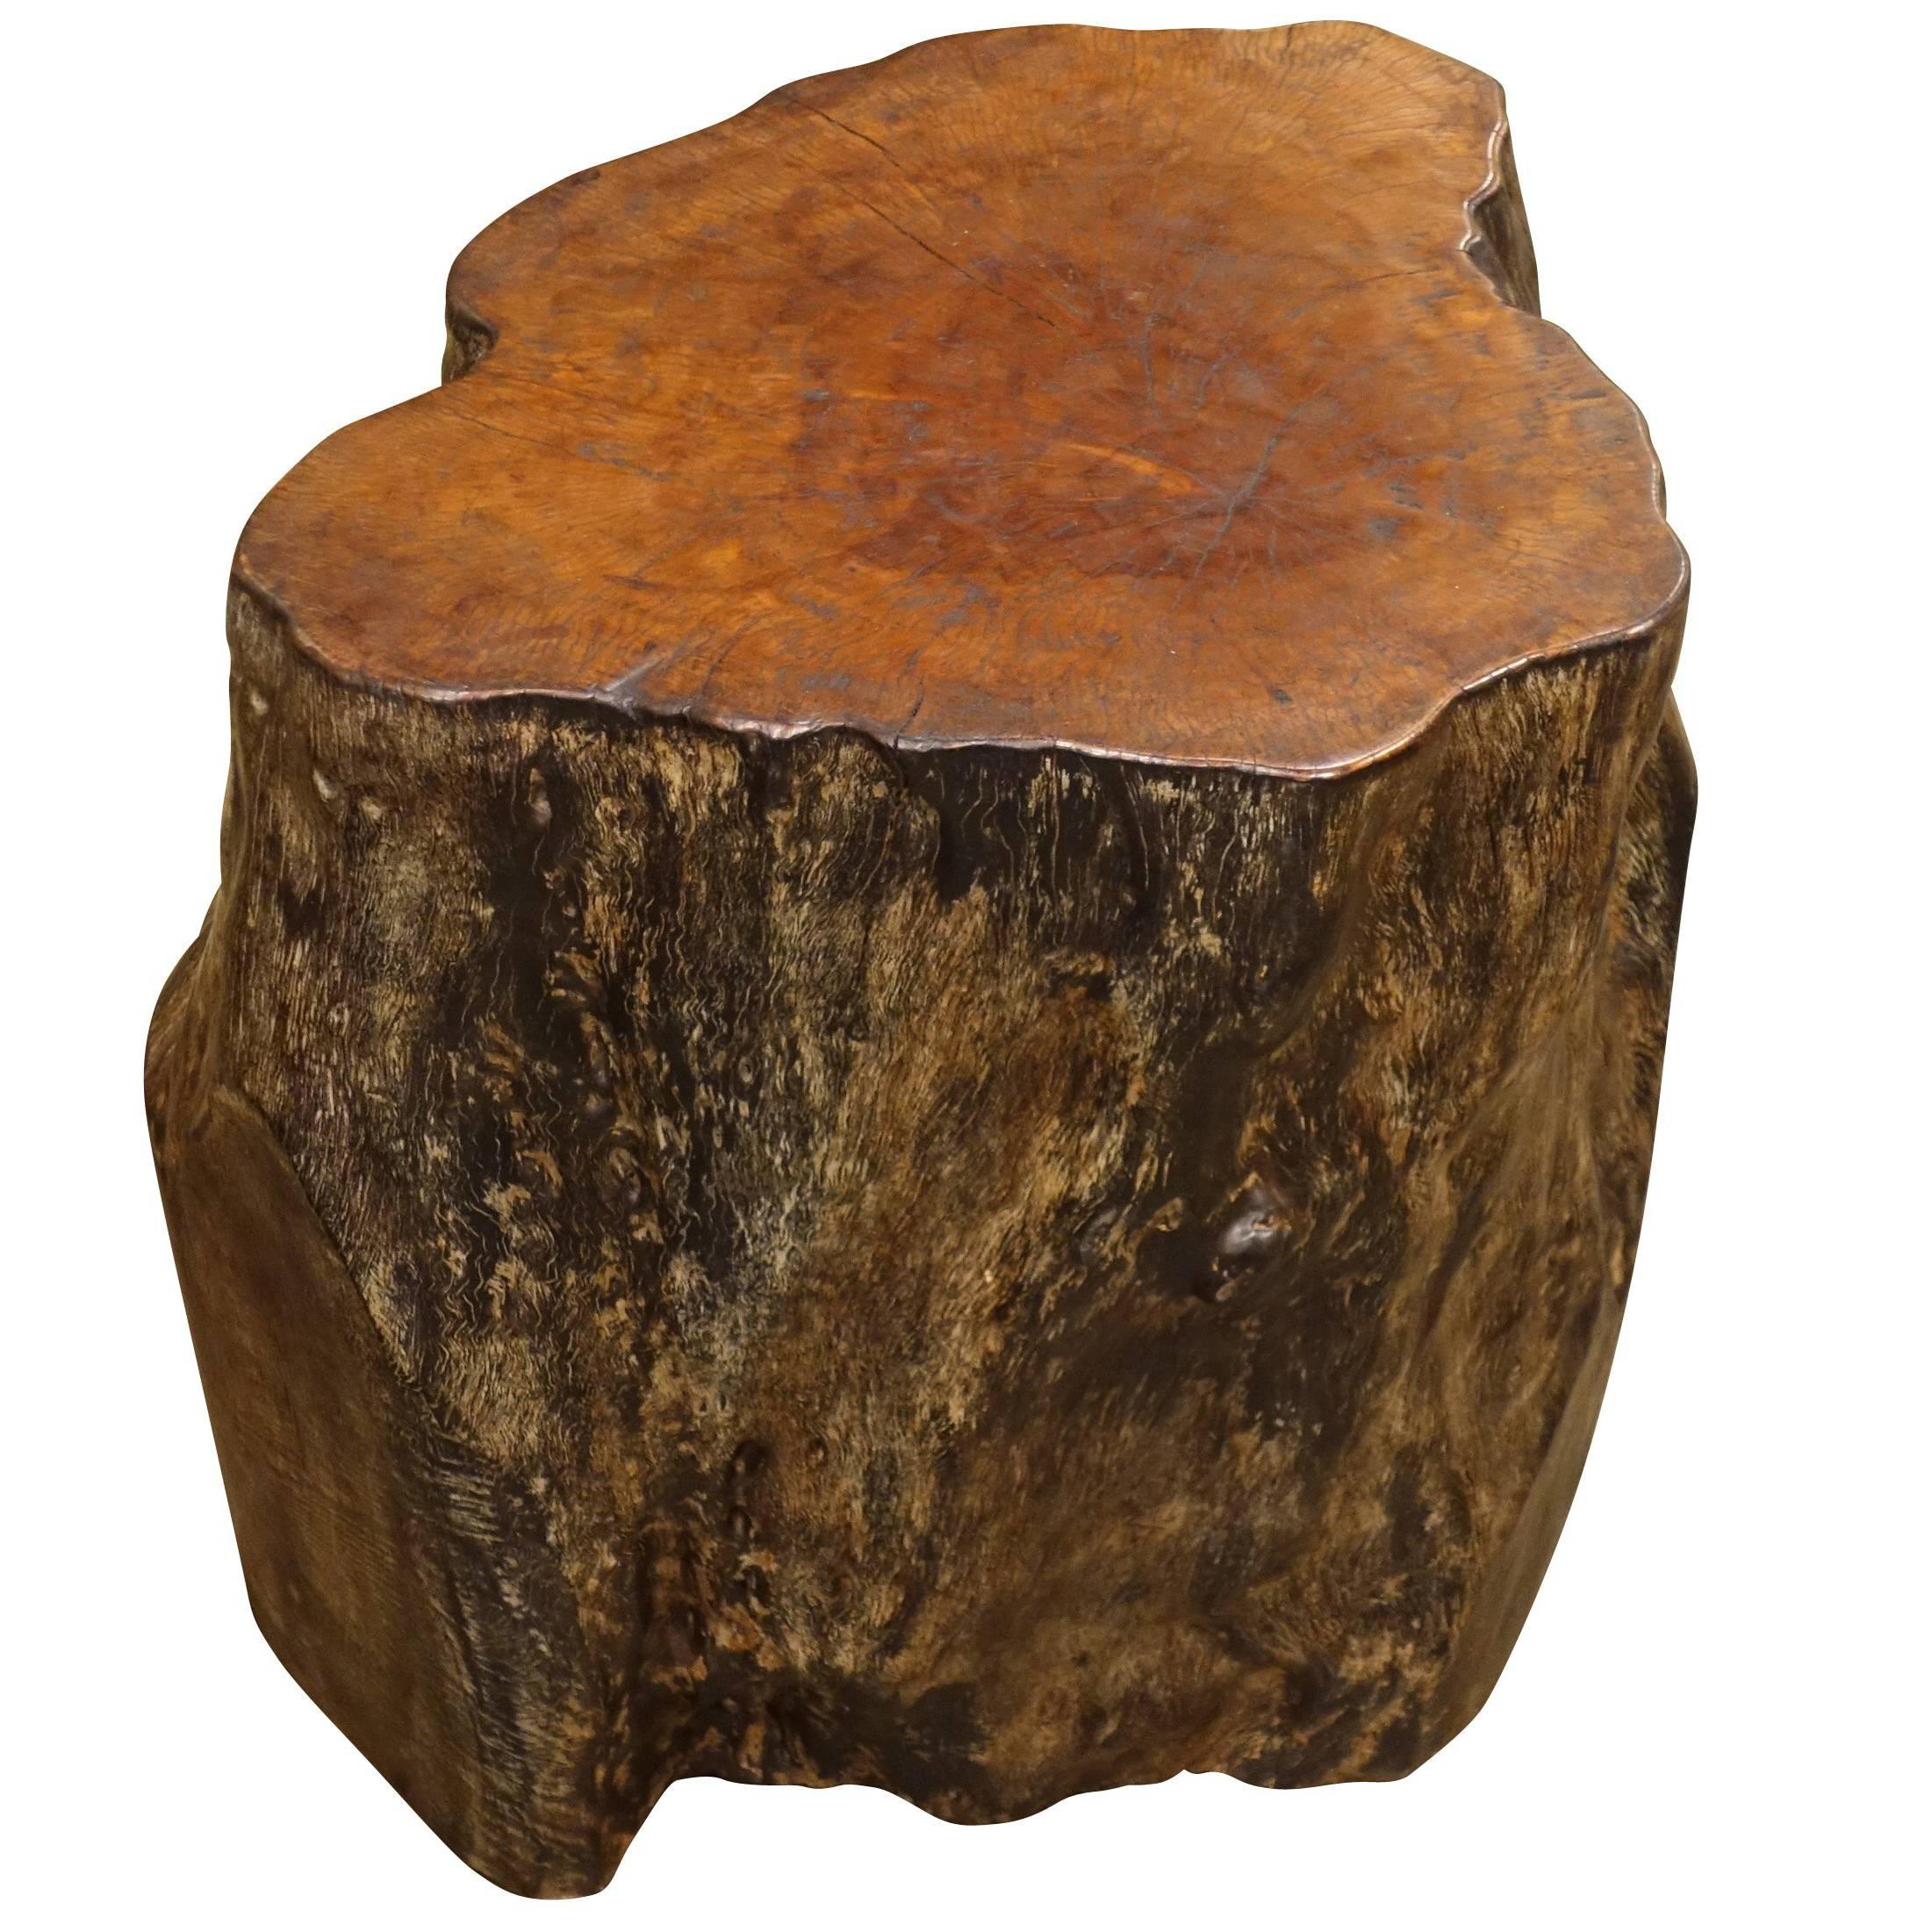 Lychee Wood Side Table, Indonesian, Contemporary